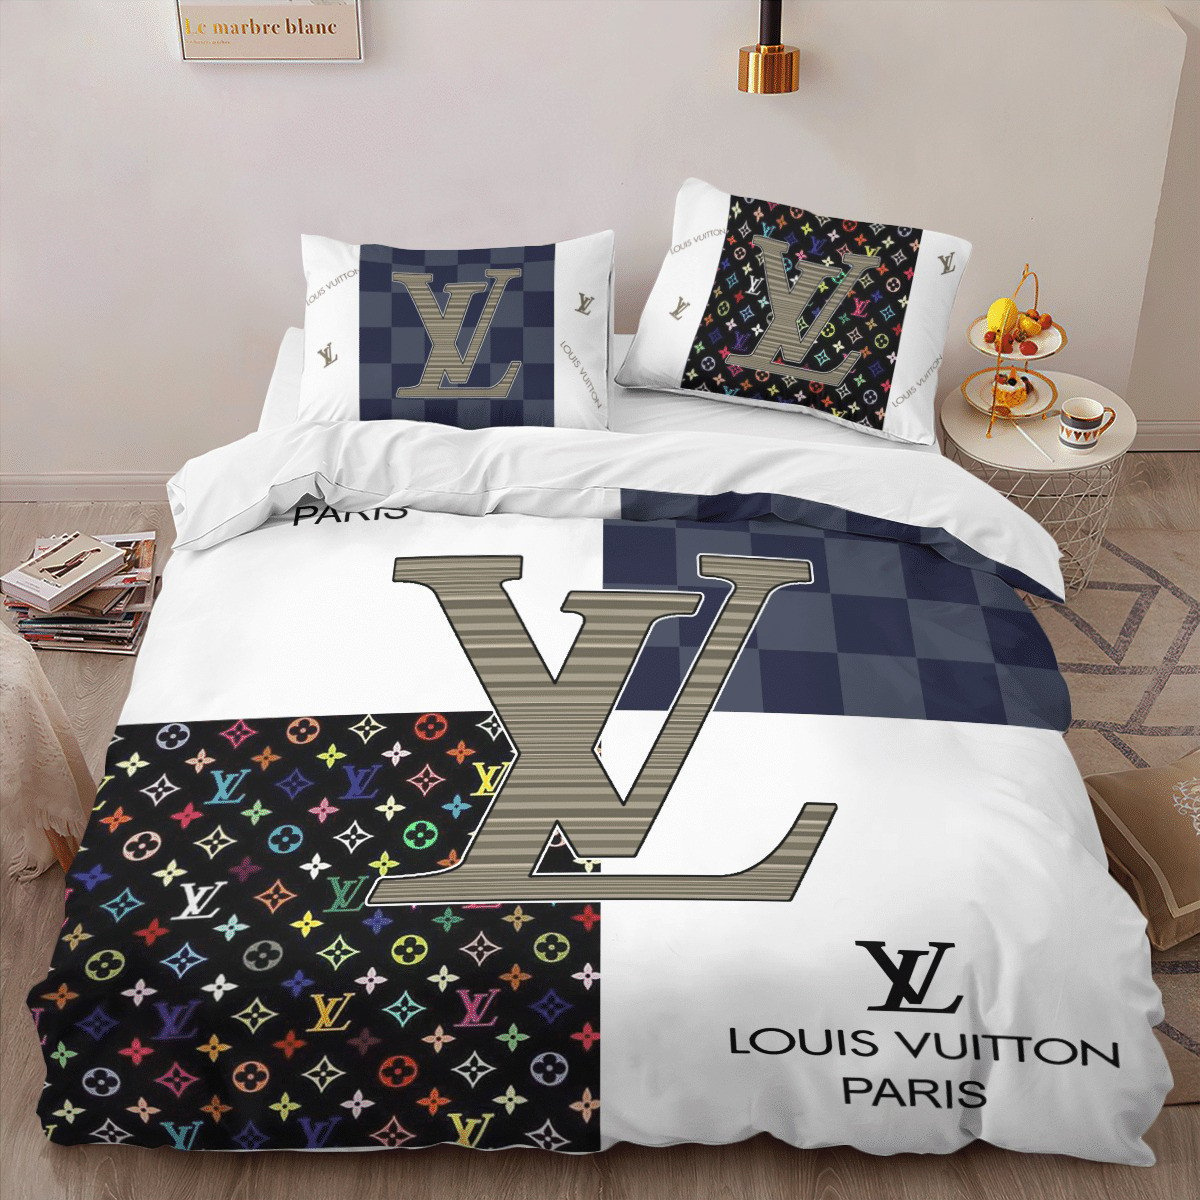 FRENCH LUXURY BRAND #10 3D PERSONALIZED CUSTOMIZED BEDDING SETS DUVET COVER BEDROOM SETS BEDSET BEDLINEN